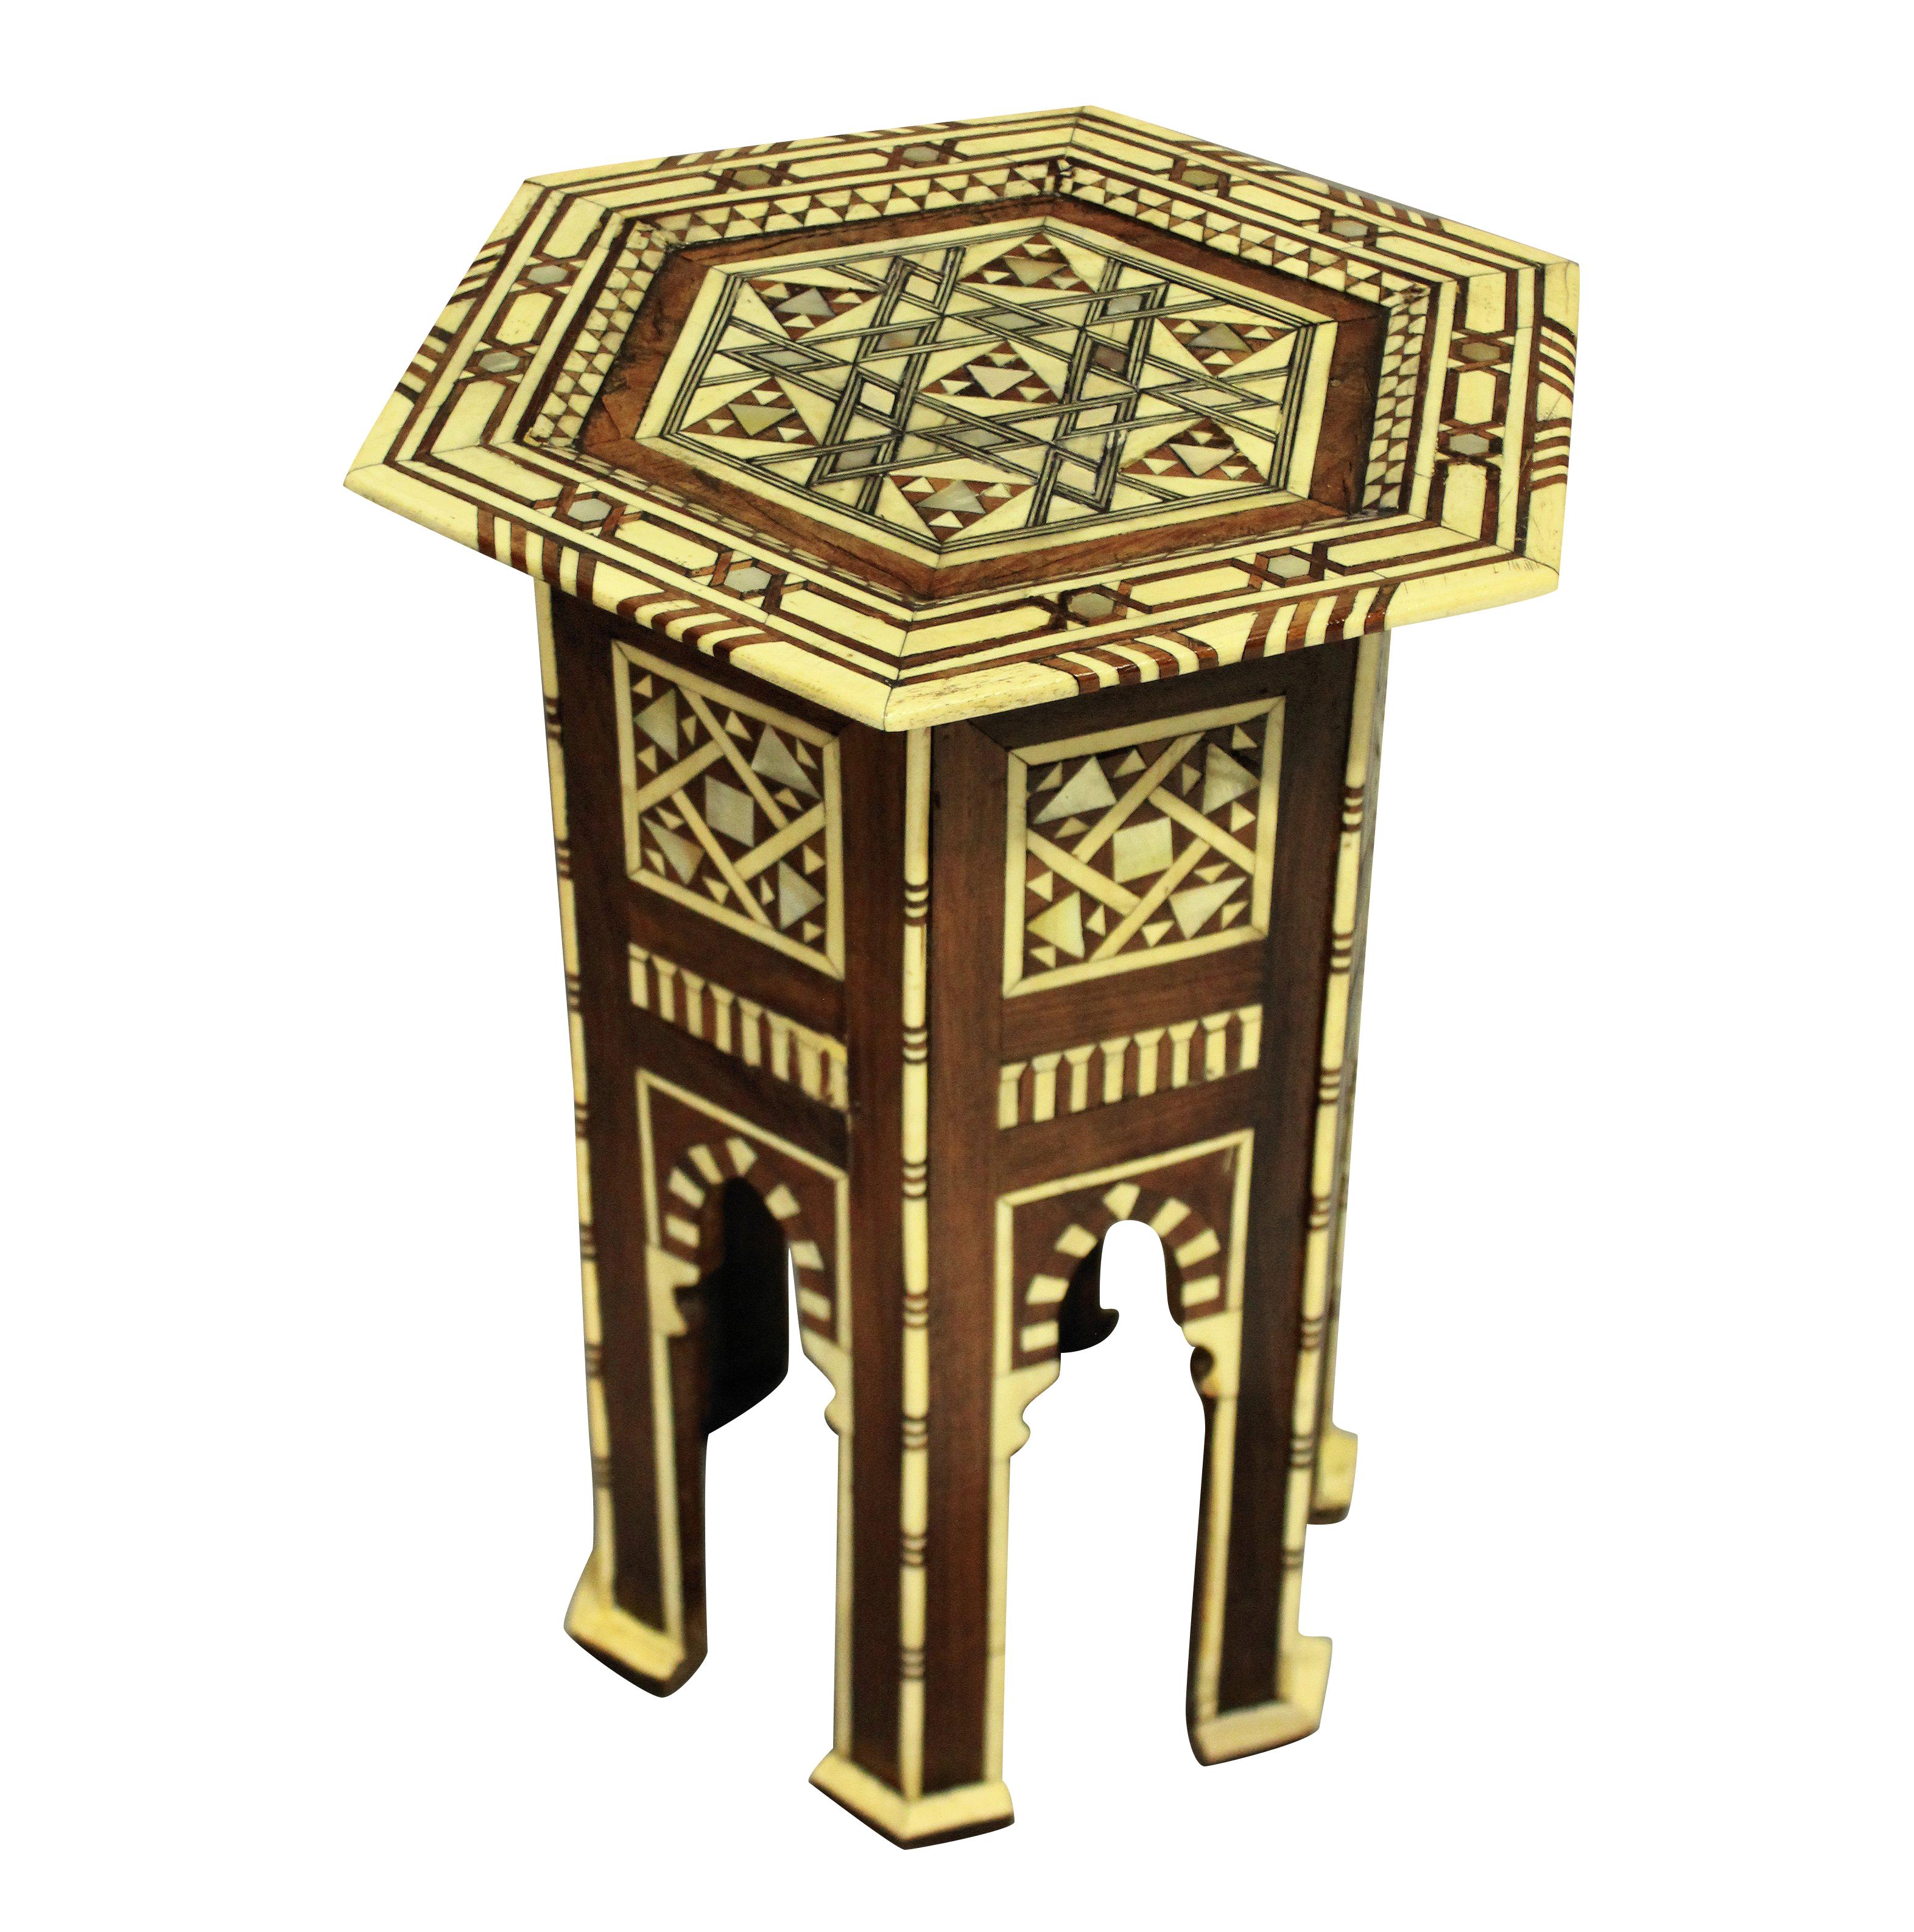 A fine Syrian side table inlaid with bone and mother of pearl in geometric designs.